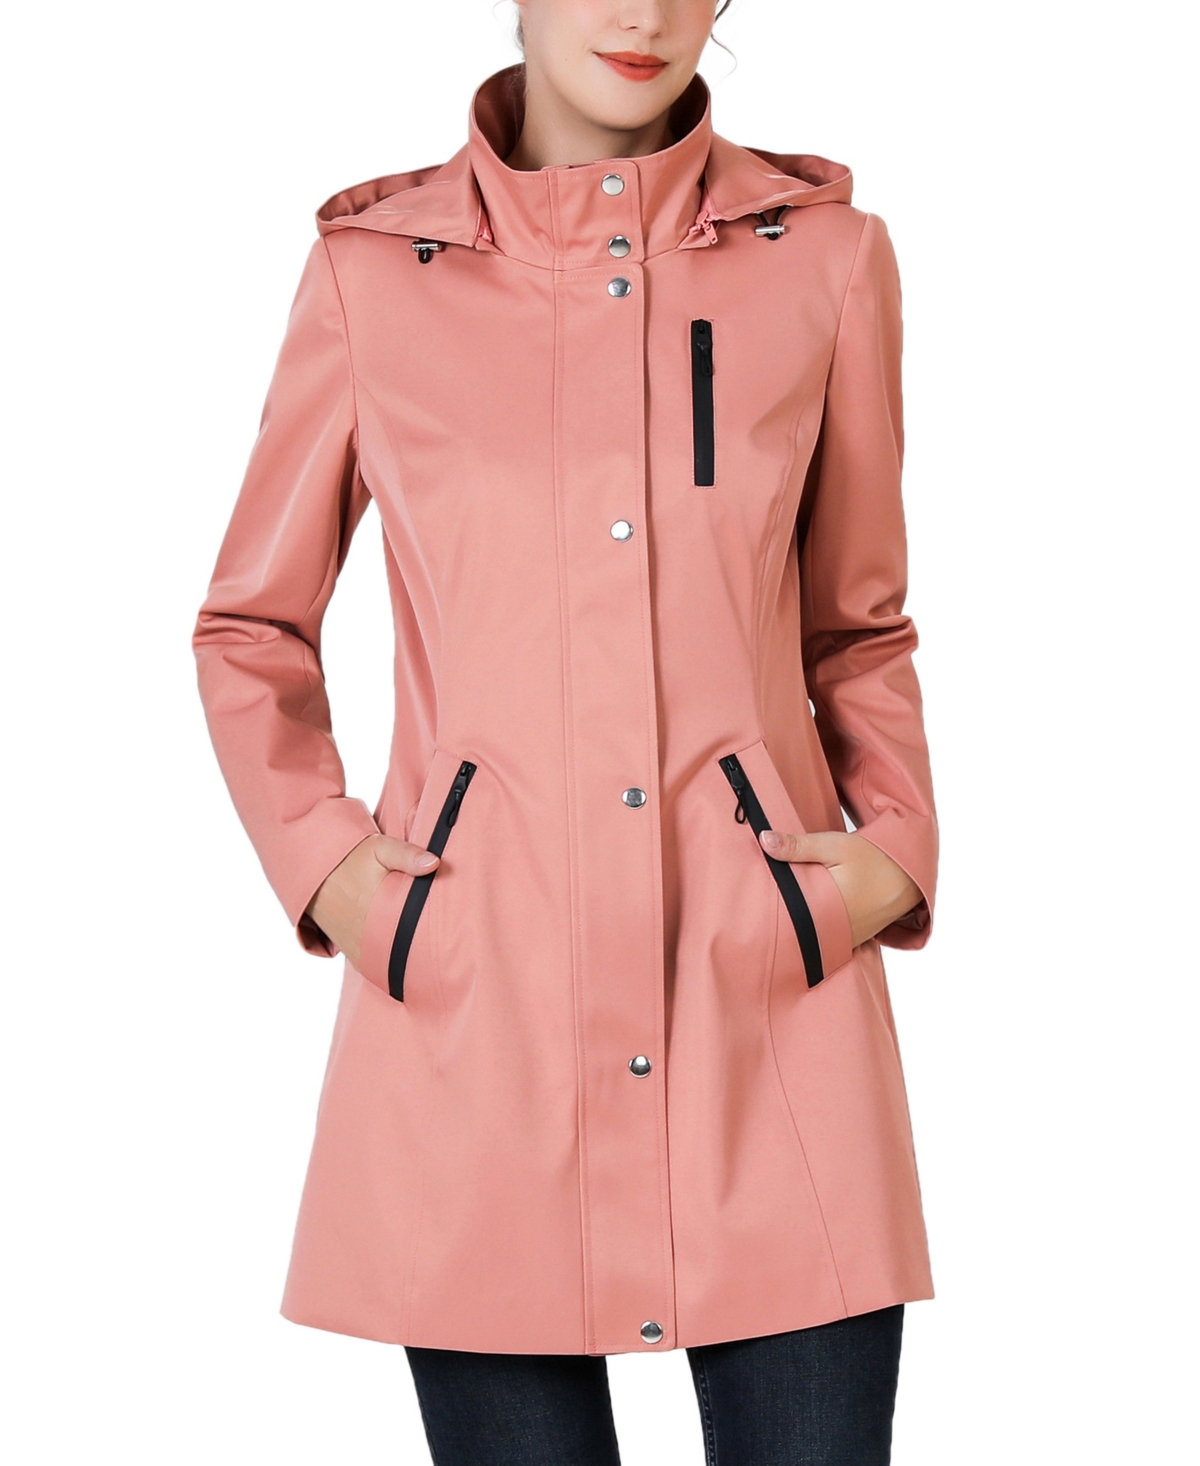 Kimi & Kai Women's Molly Water Resistant Hooded Anorak Jacket In Guava